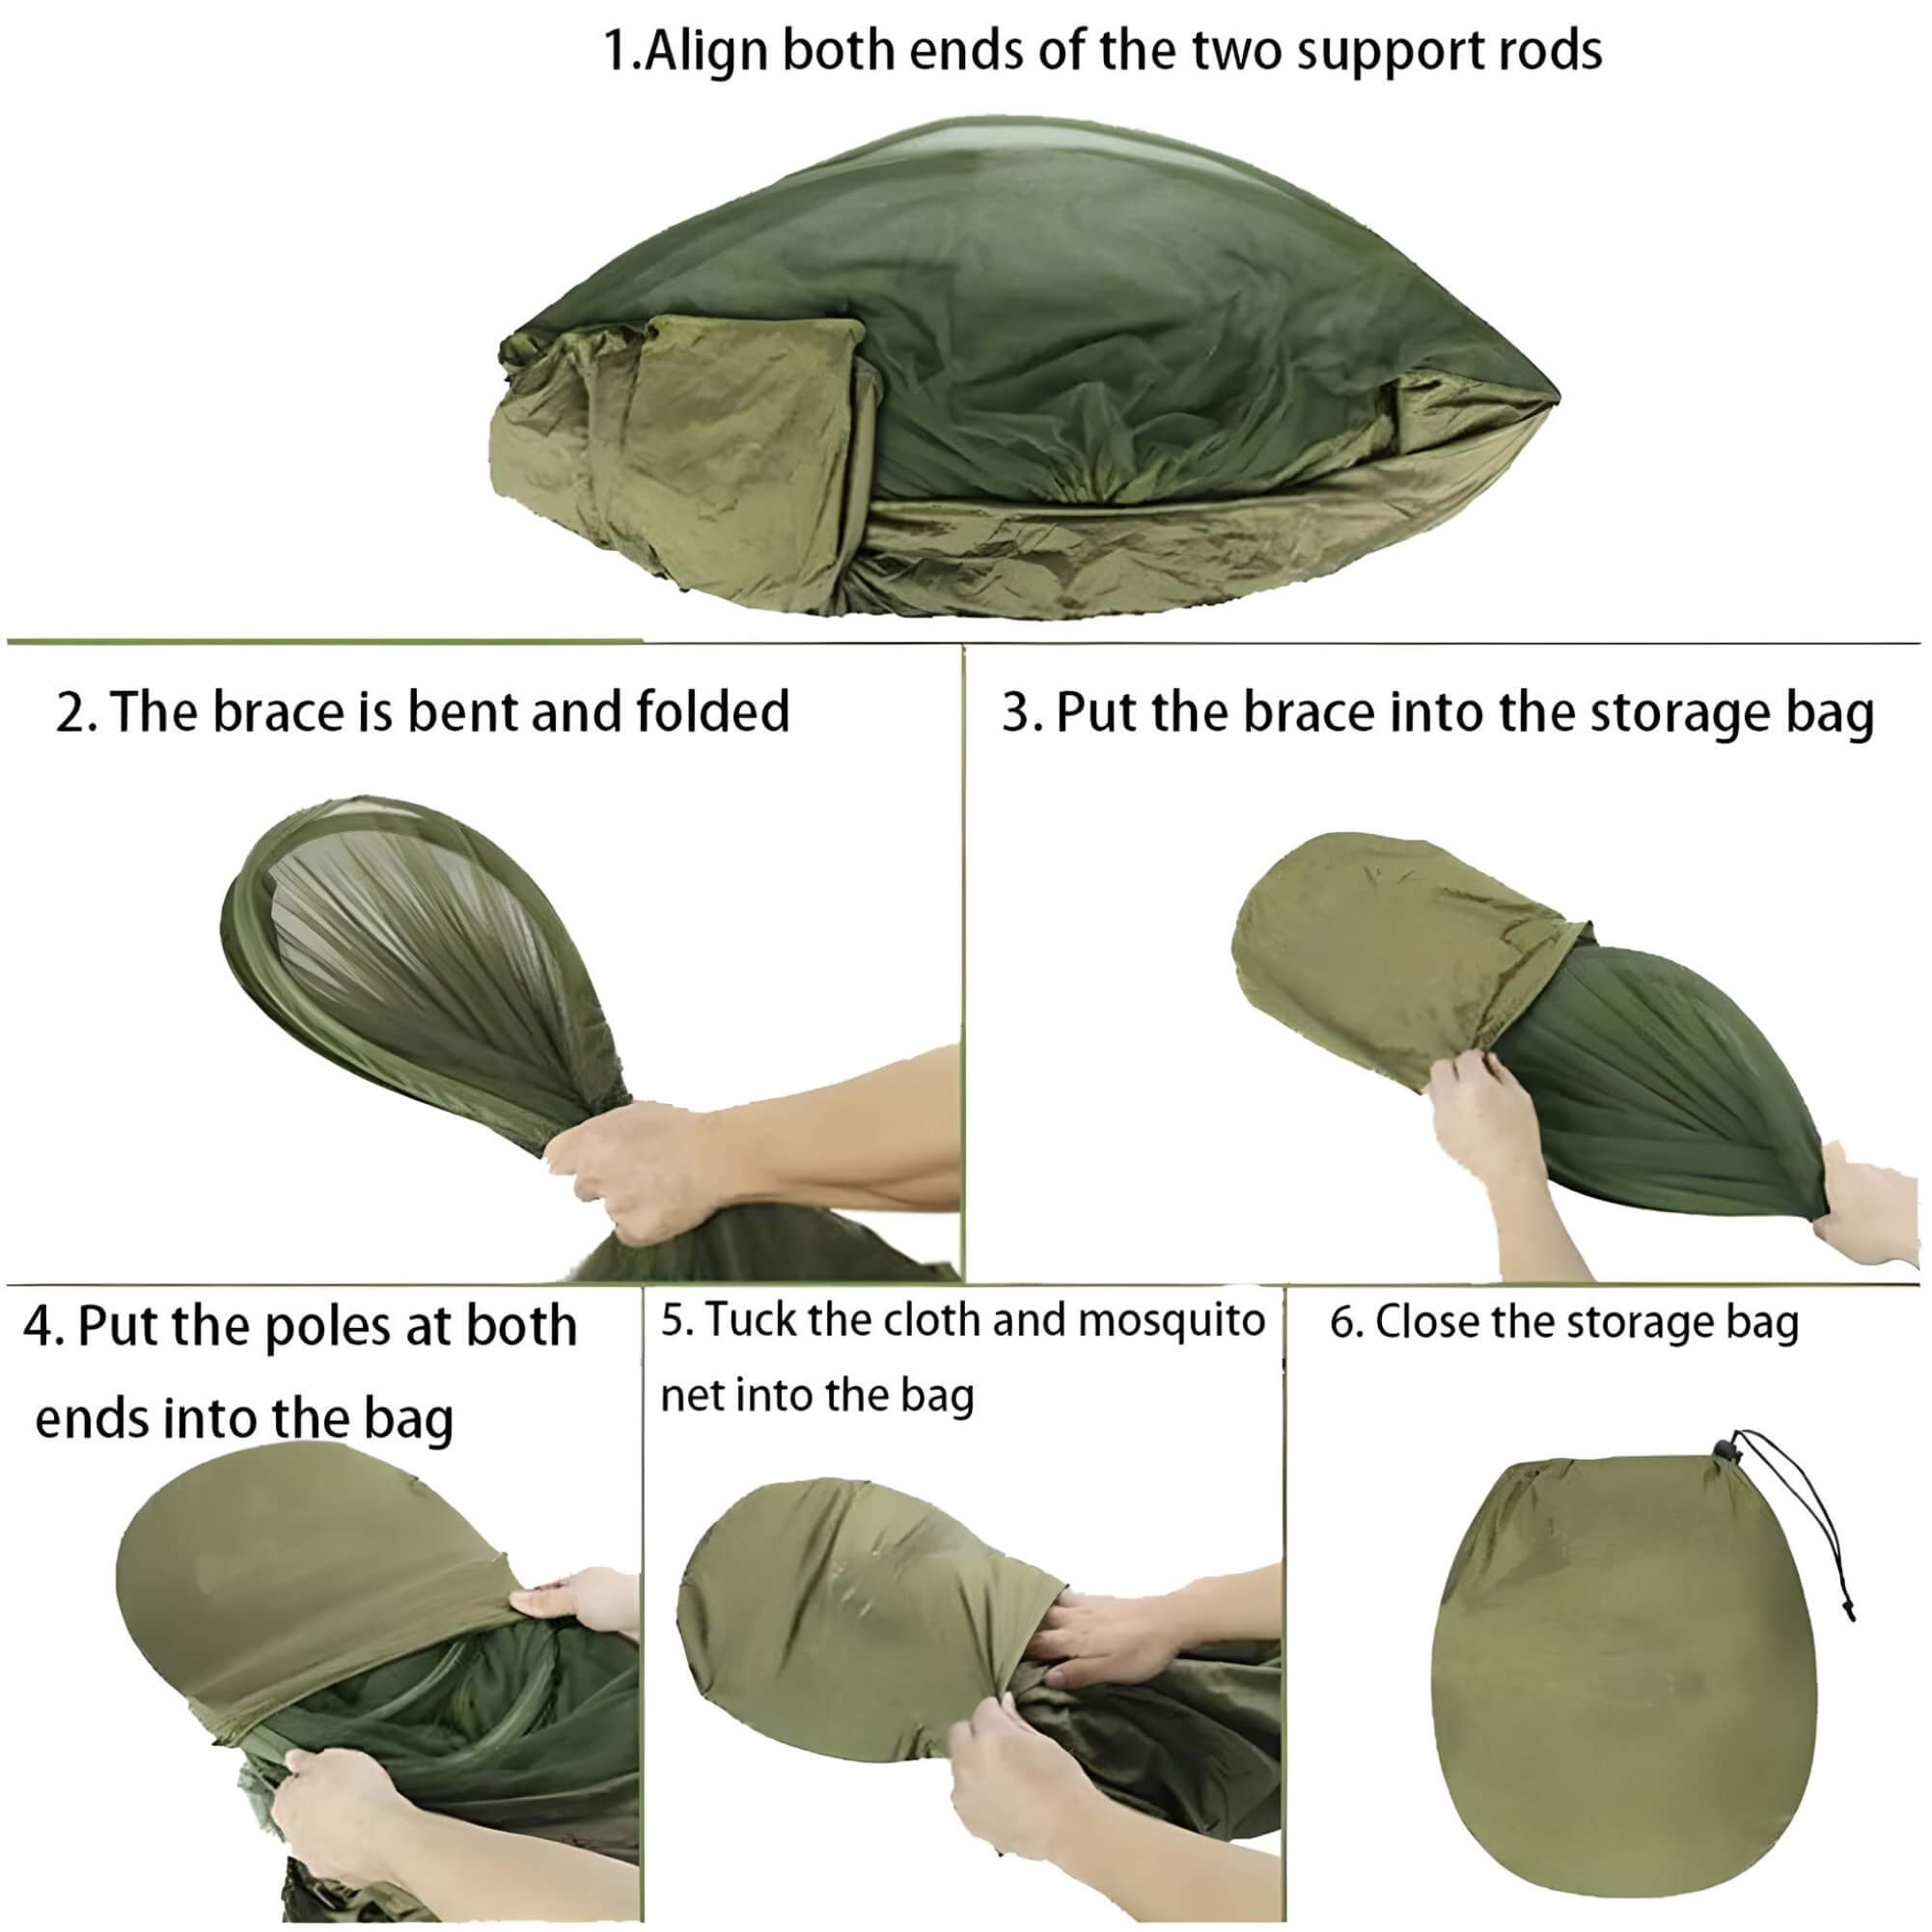 camping-hammock-with-mosquito-net-how-to-put-in-bag-details